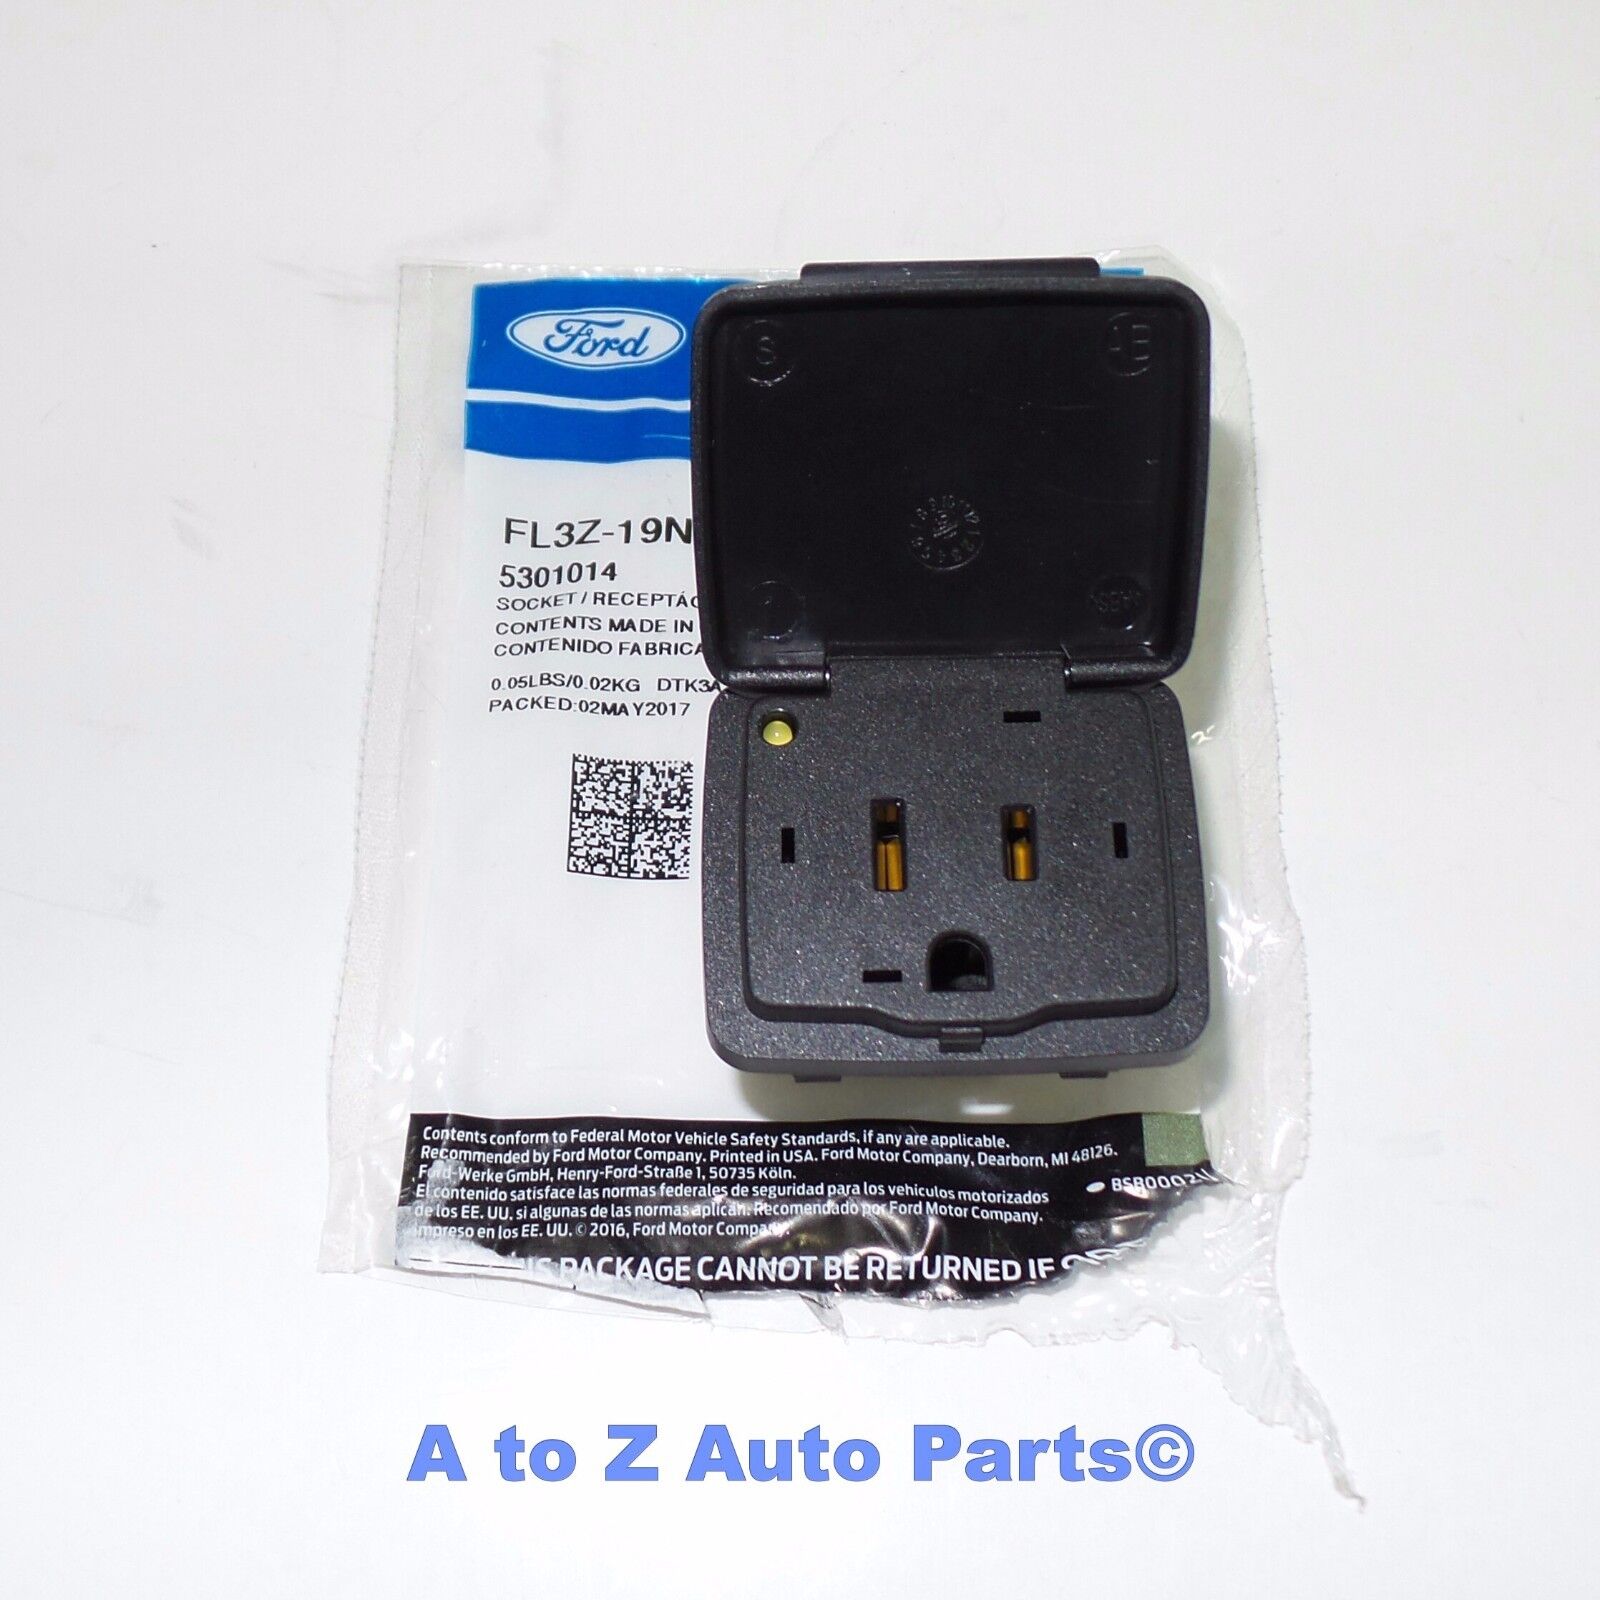 2015-2016 Ford F150 Center Console Rear 110V Volt 400W Power Outlet,OE